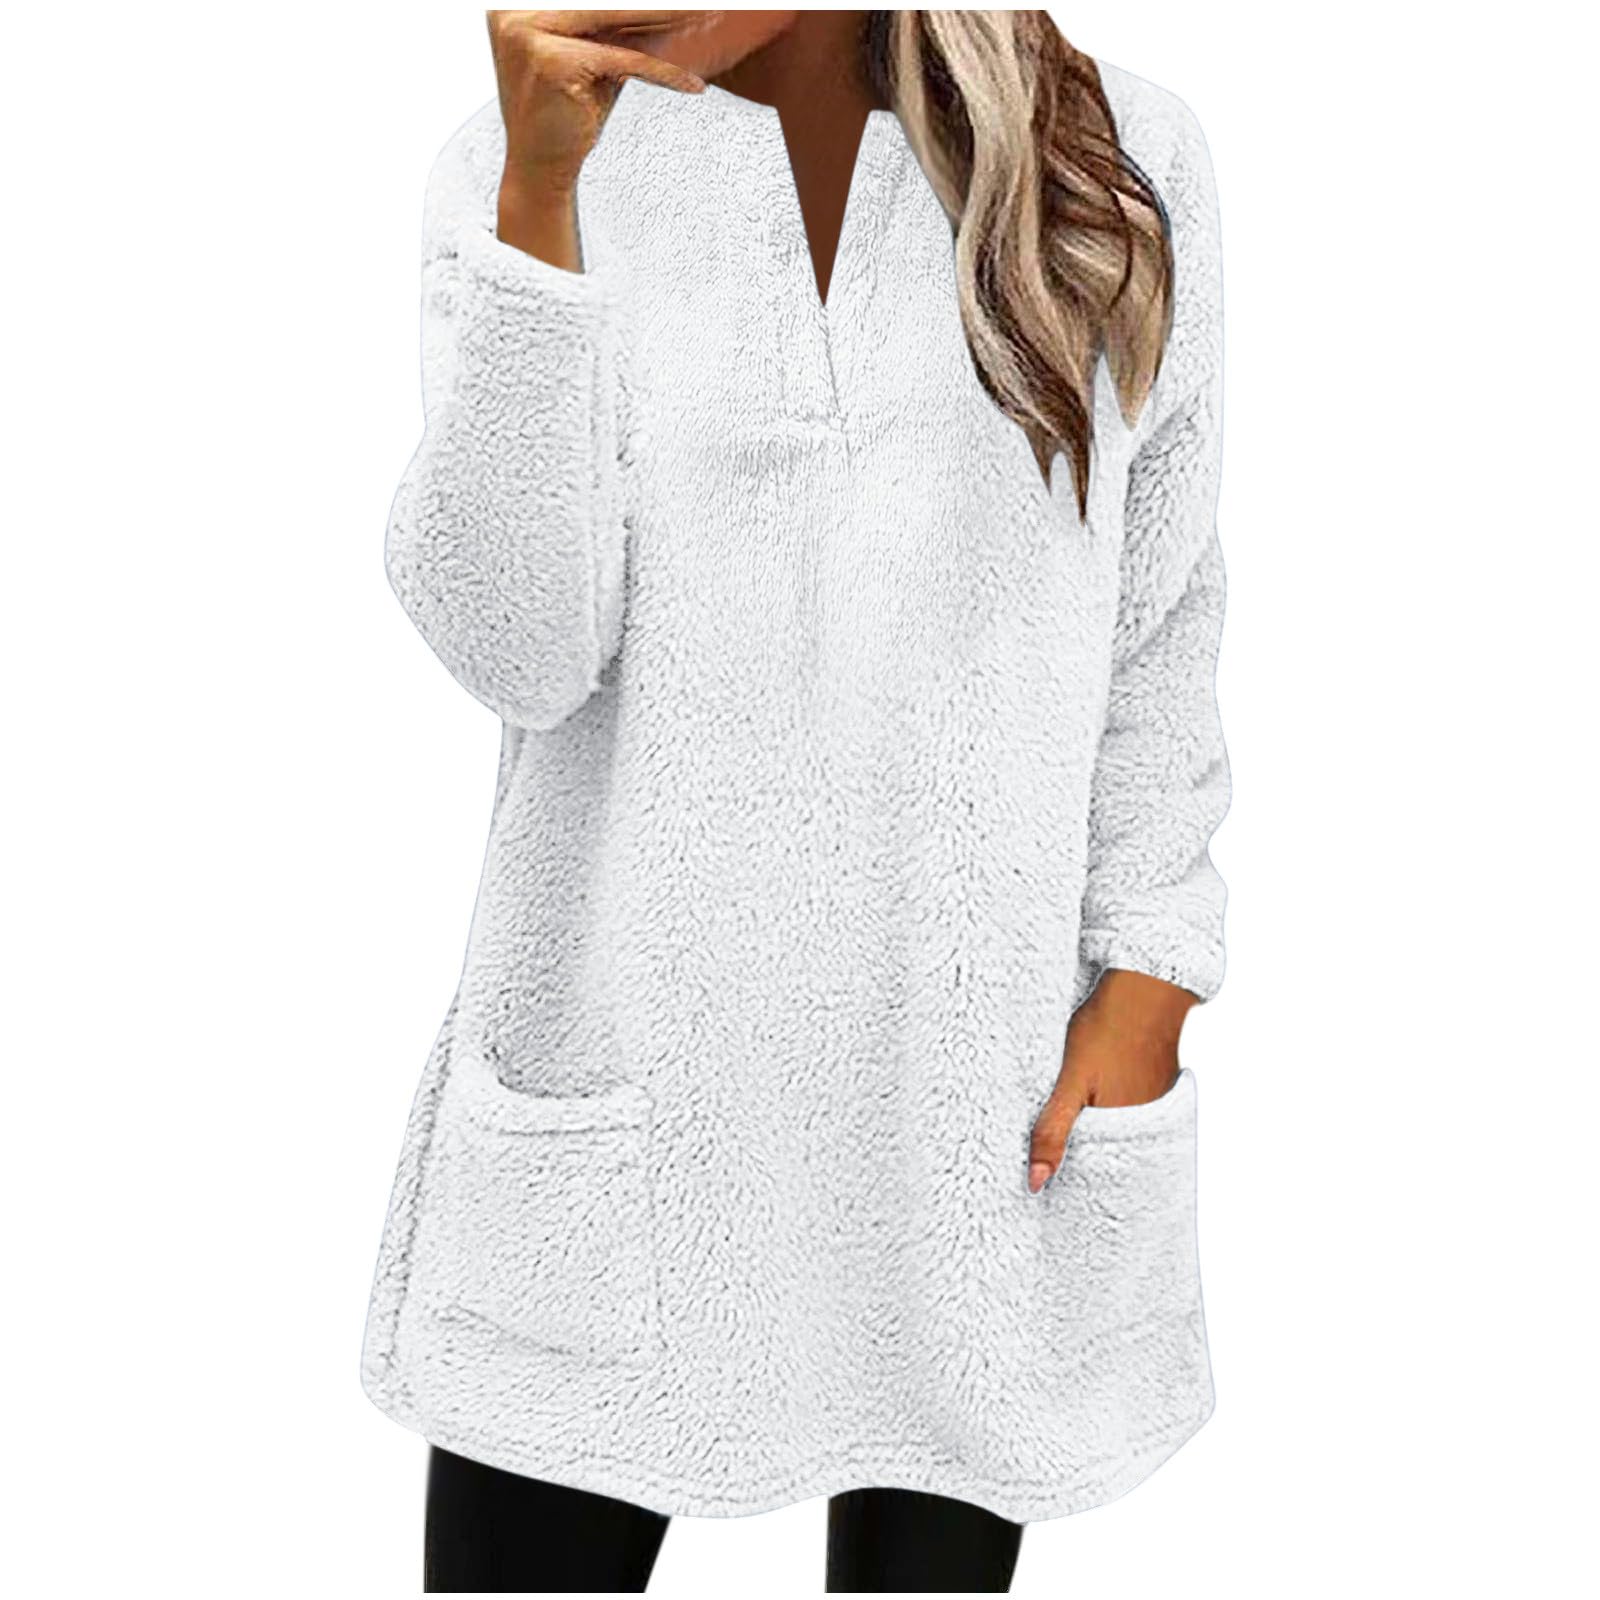 AMhomely Ladies Womens Soft Teddy Fleece Hooded Jumper Plus Size Double  Fleece Casual Hoodies With Pocket V Neck Soft Fleece Hooded Sweatshirts  Plain Pullover Tops Winter Lightweight Lounge Tops 02 White XL